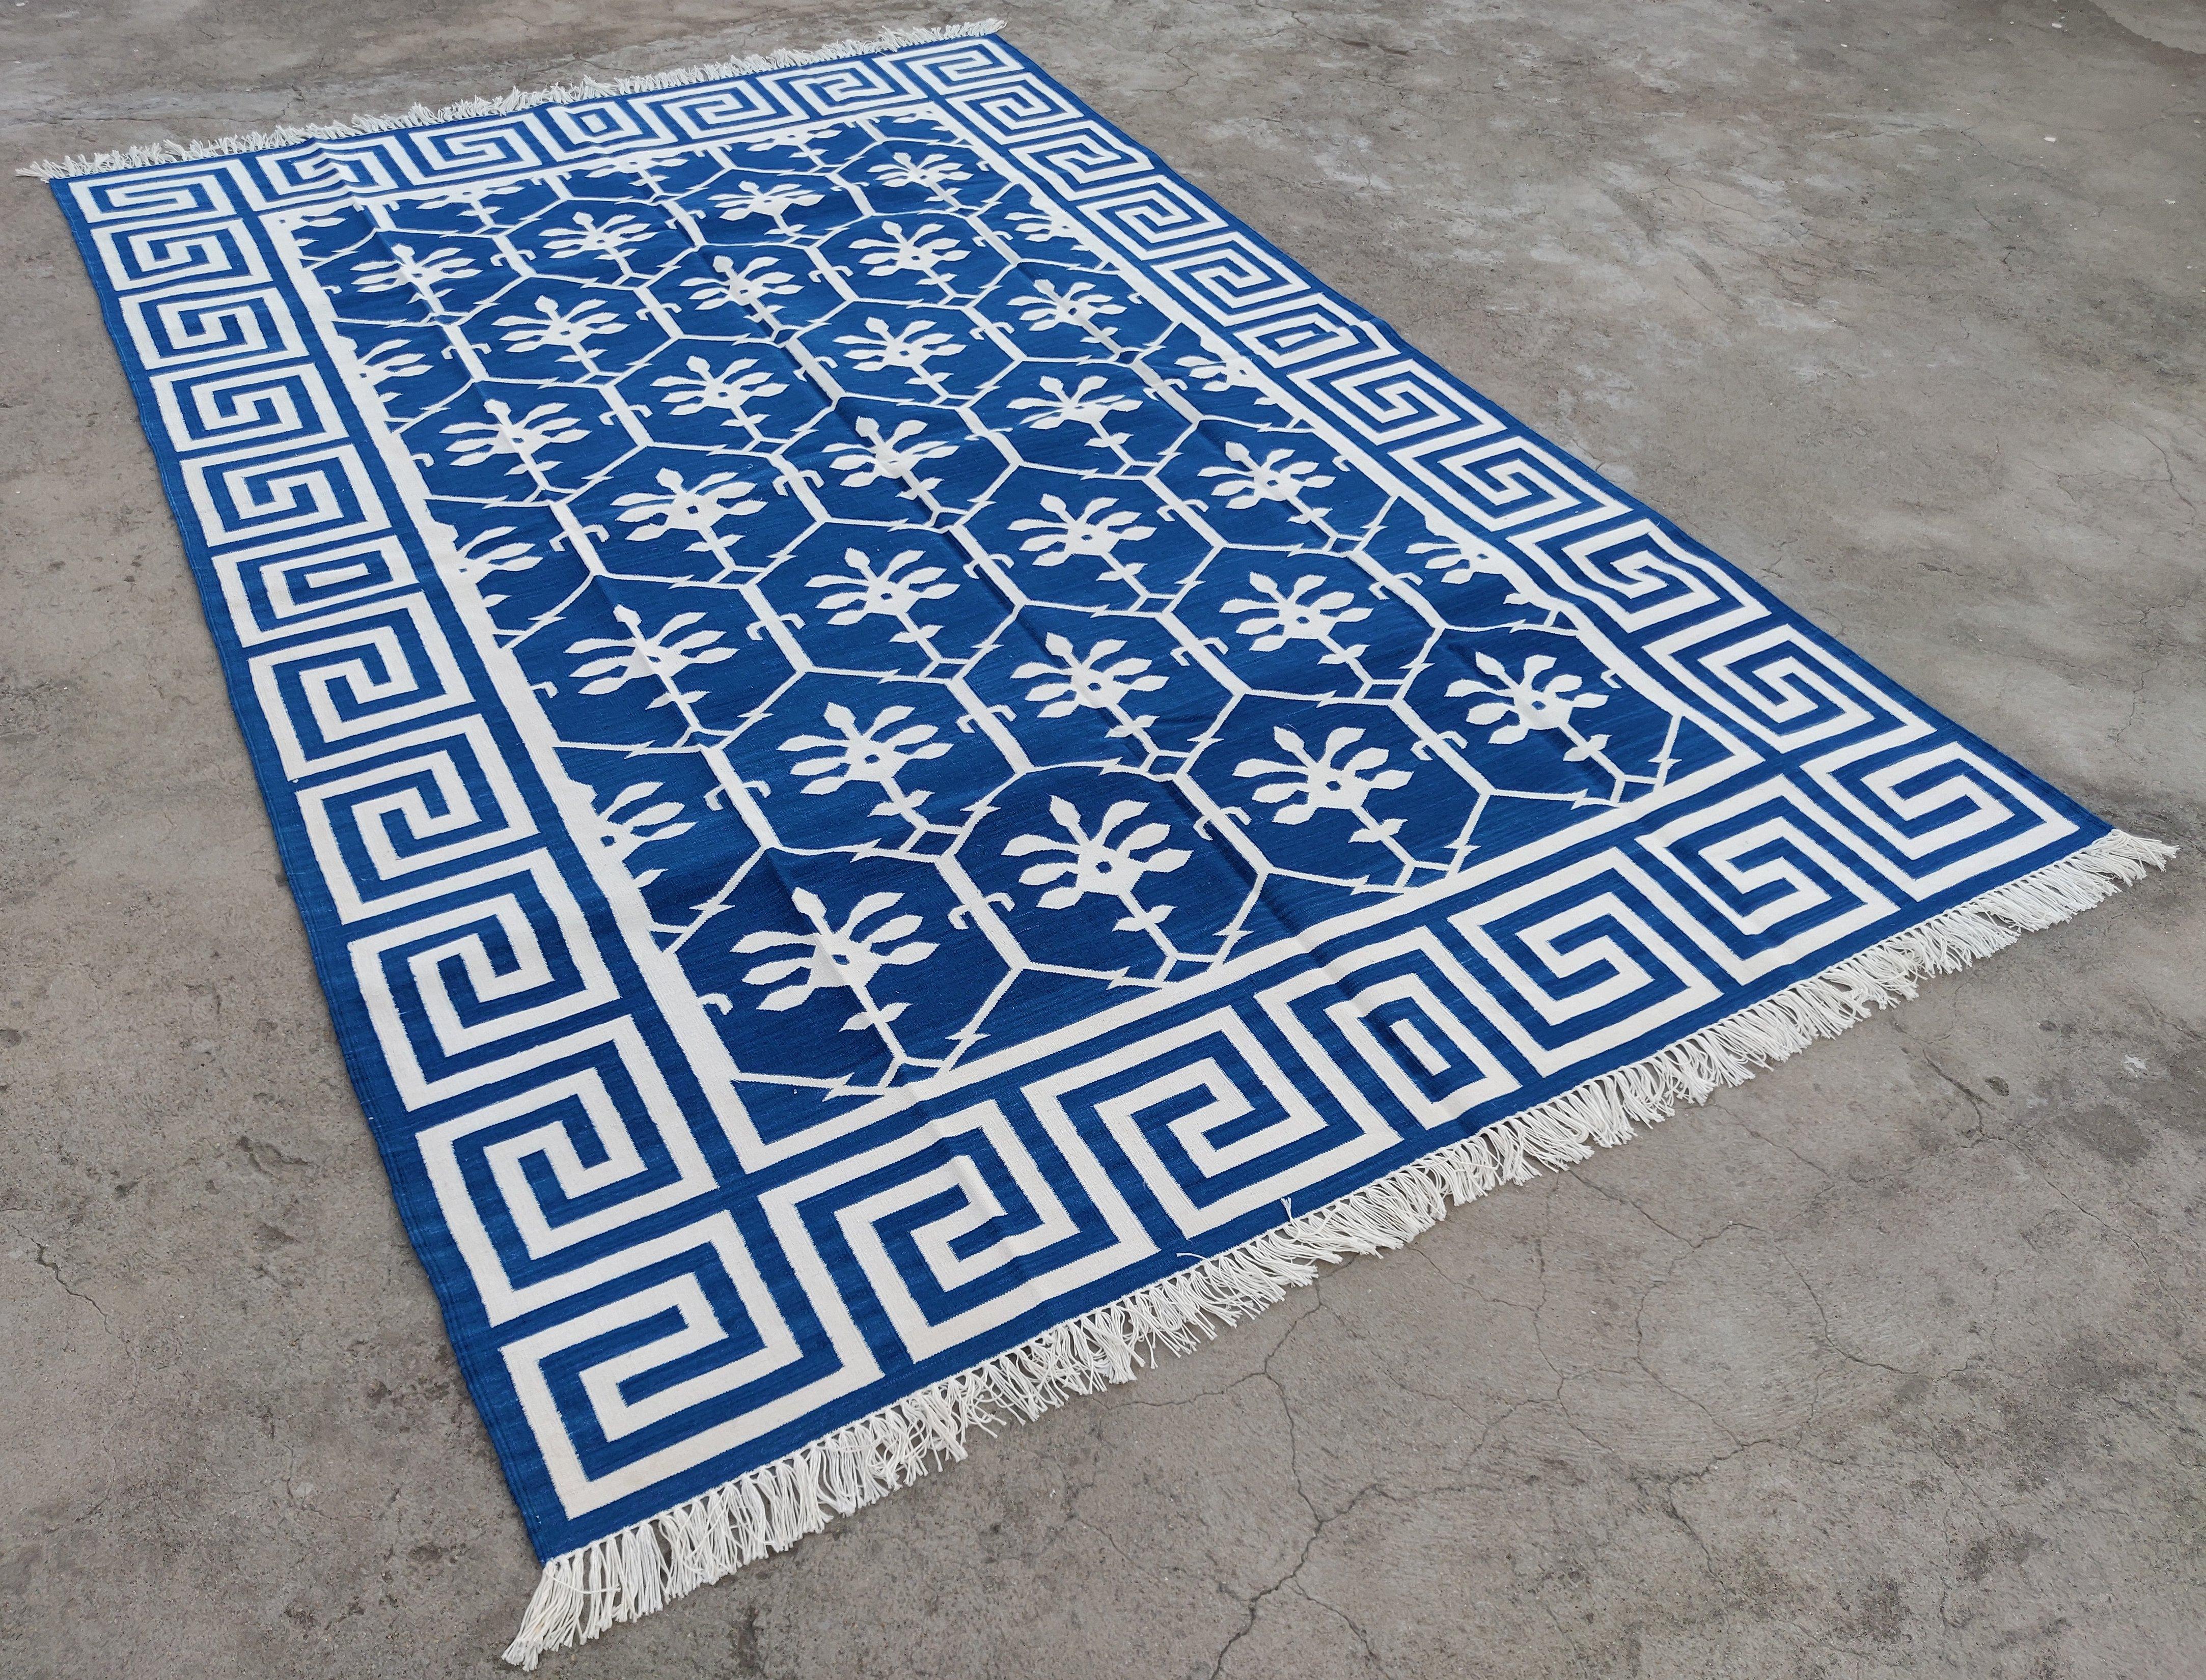 Cotton Vegetable Dyed Reversible Indigo Blue And White Geometric Baroda Patterned Flower Indian Rug - 6'x9'
These special flat-weave dhurries are hand-woven with 15 ply 100% cotton yarn. Due to the special manufacturing techniques used to create our